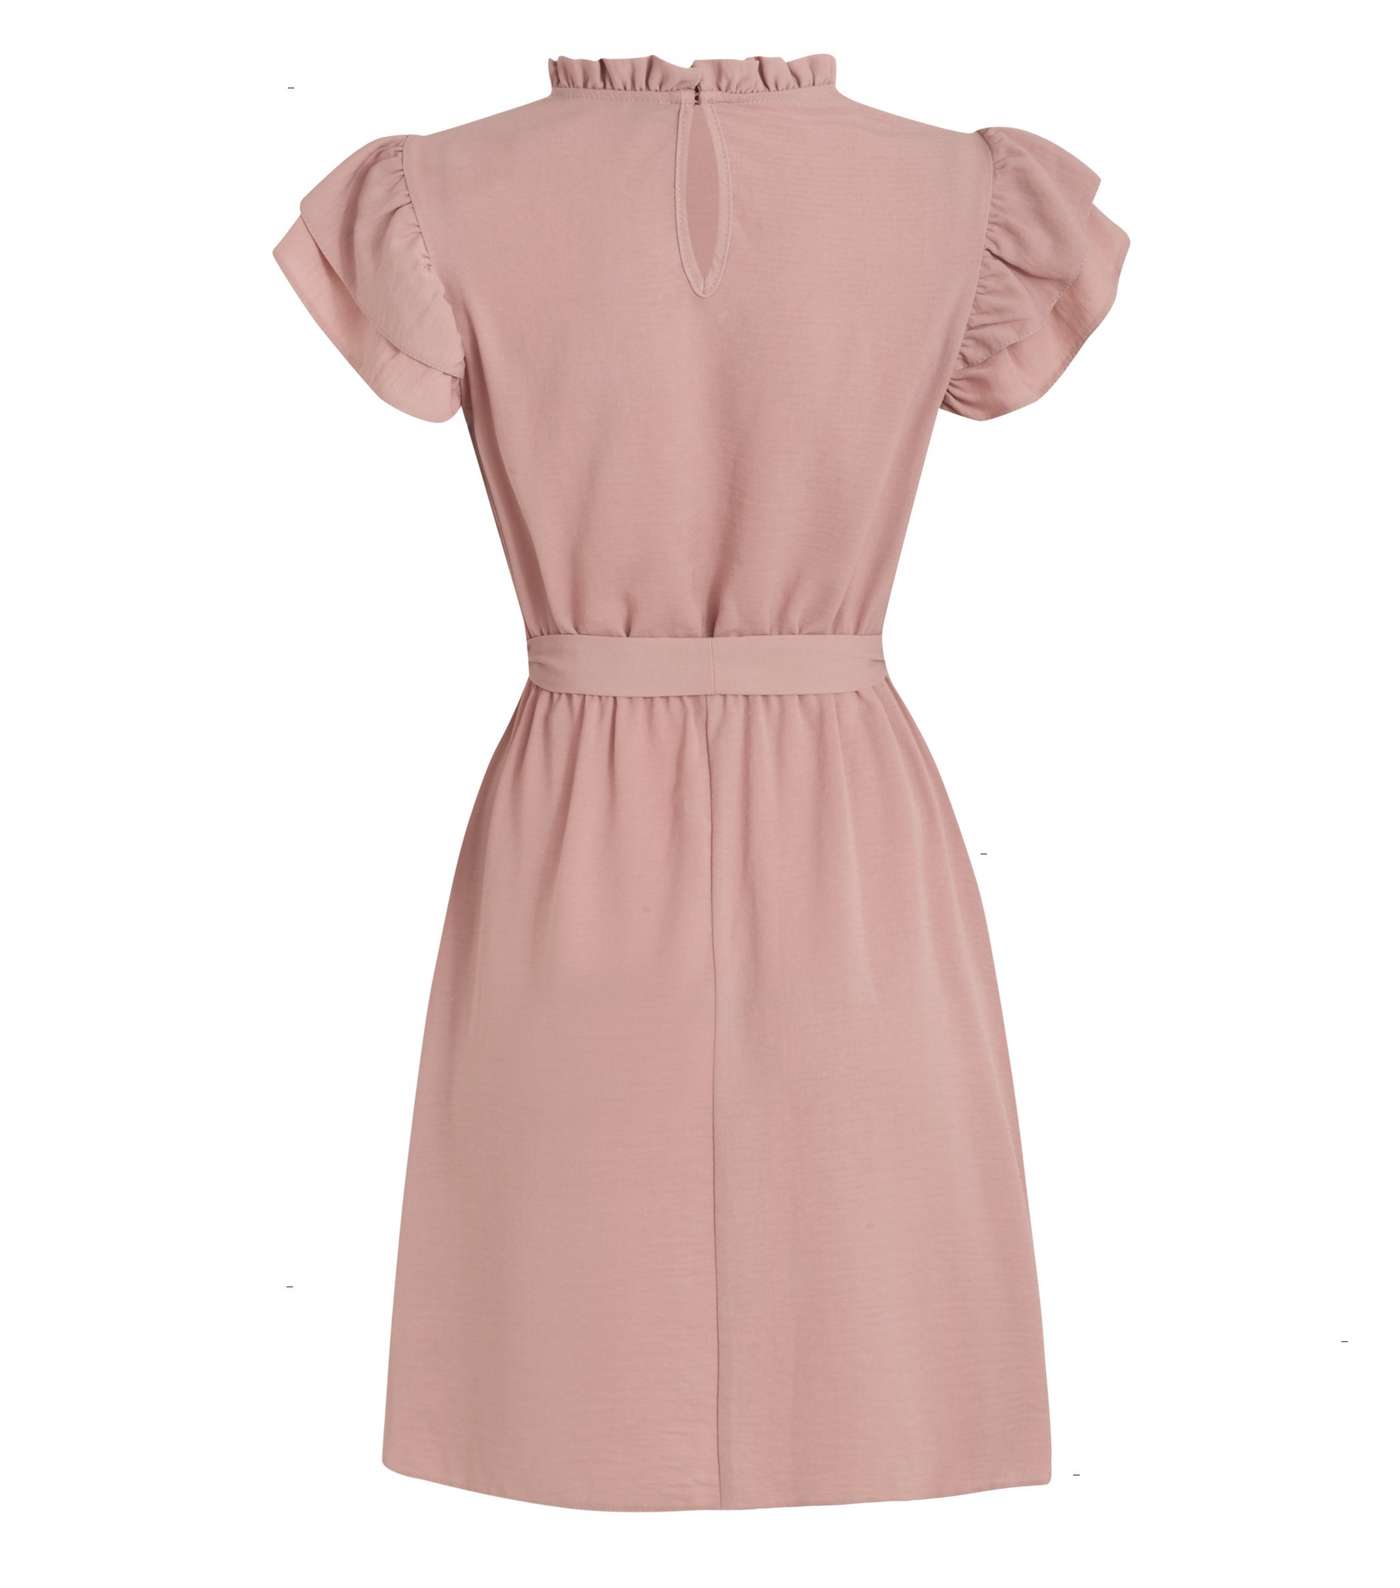 Mid Pink Frill High Neck Dress Image 2